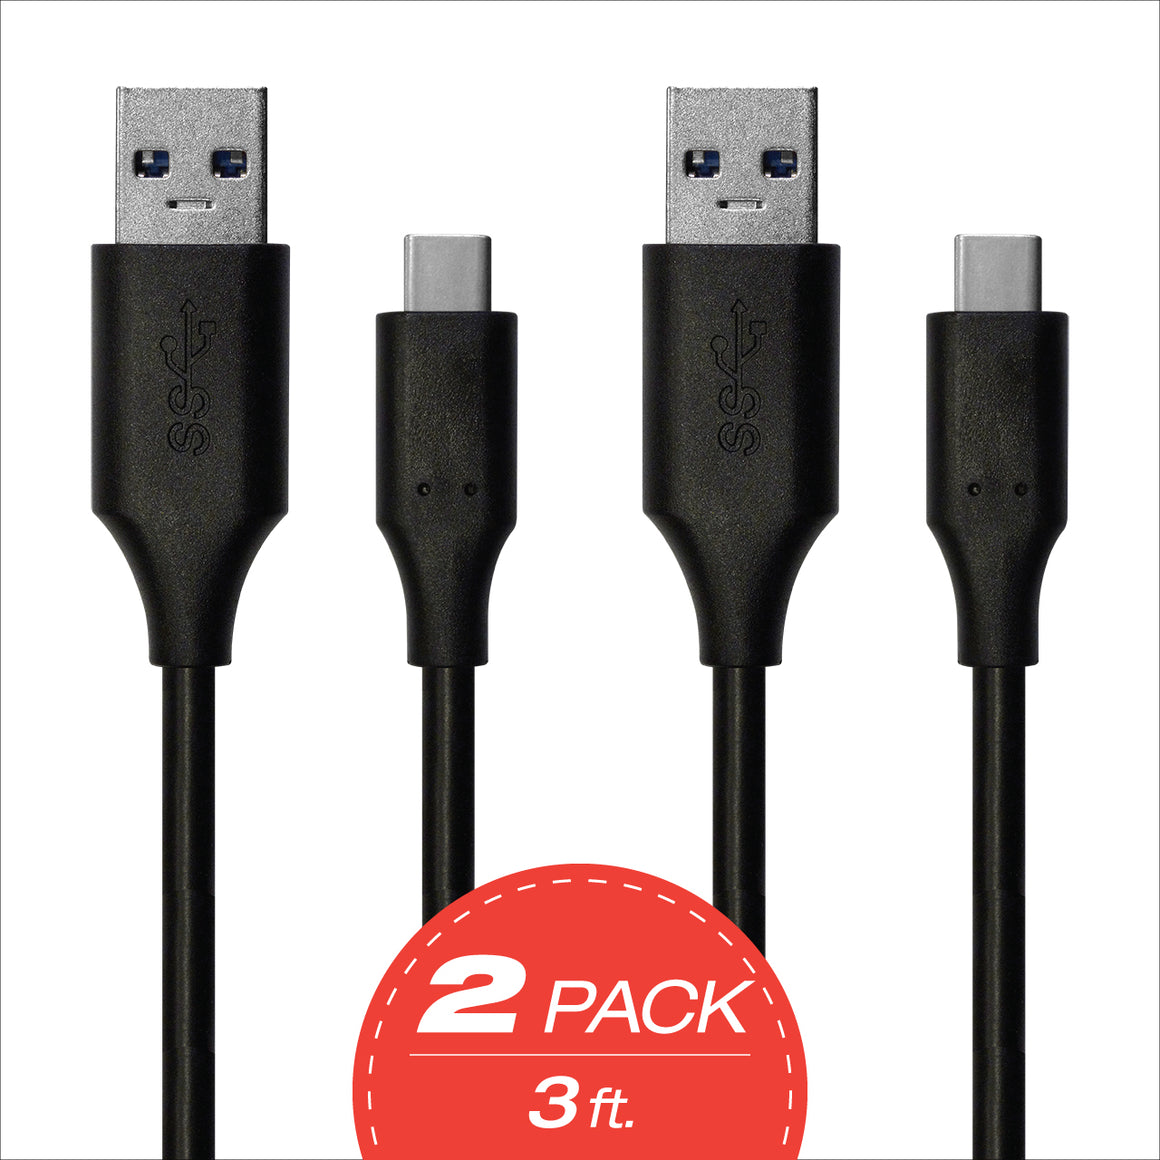 omnigates black USB 3.0 type A to Type c power cable 2 pack